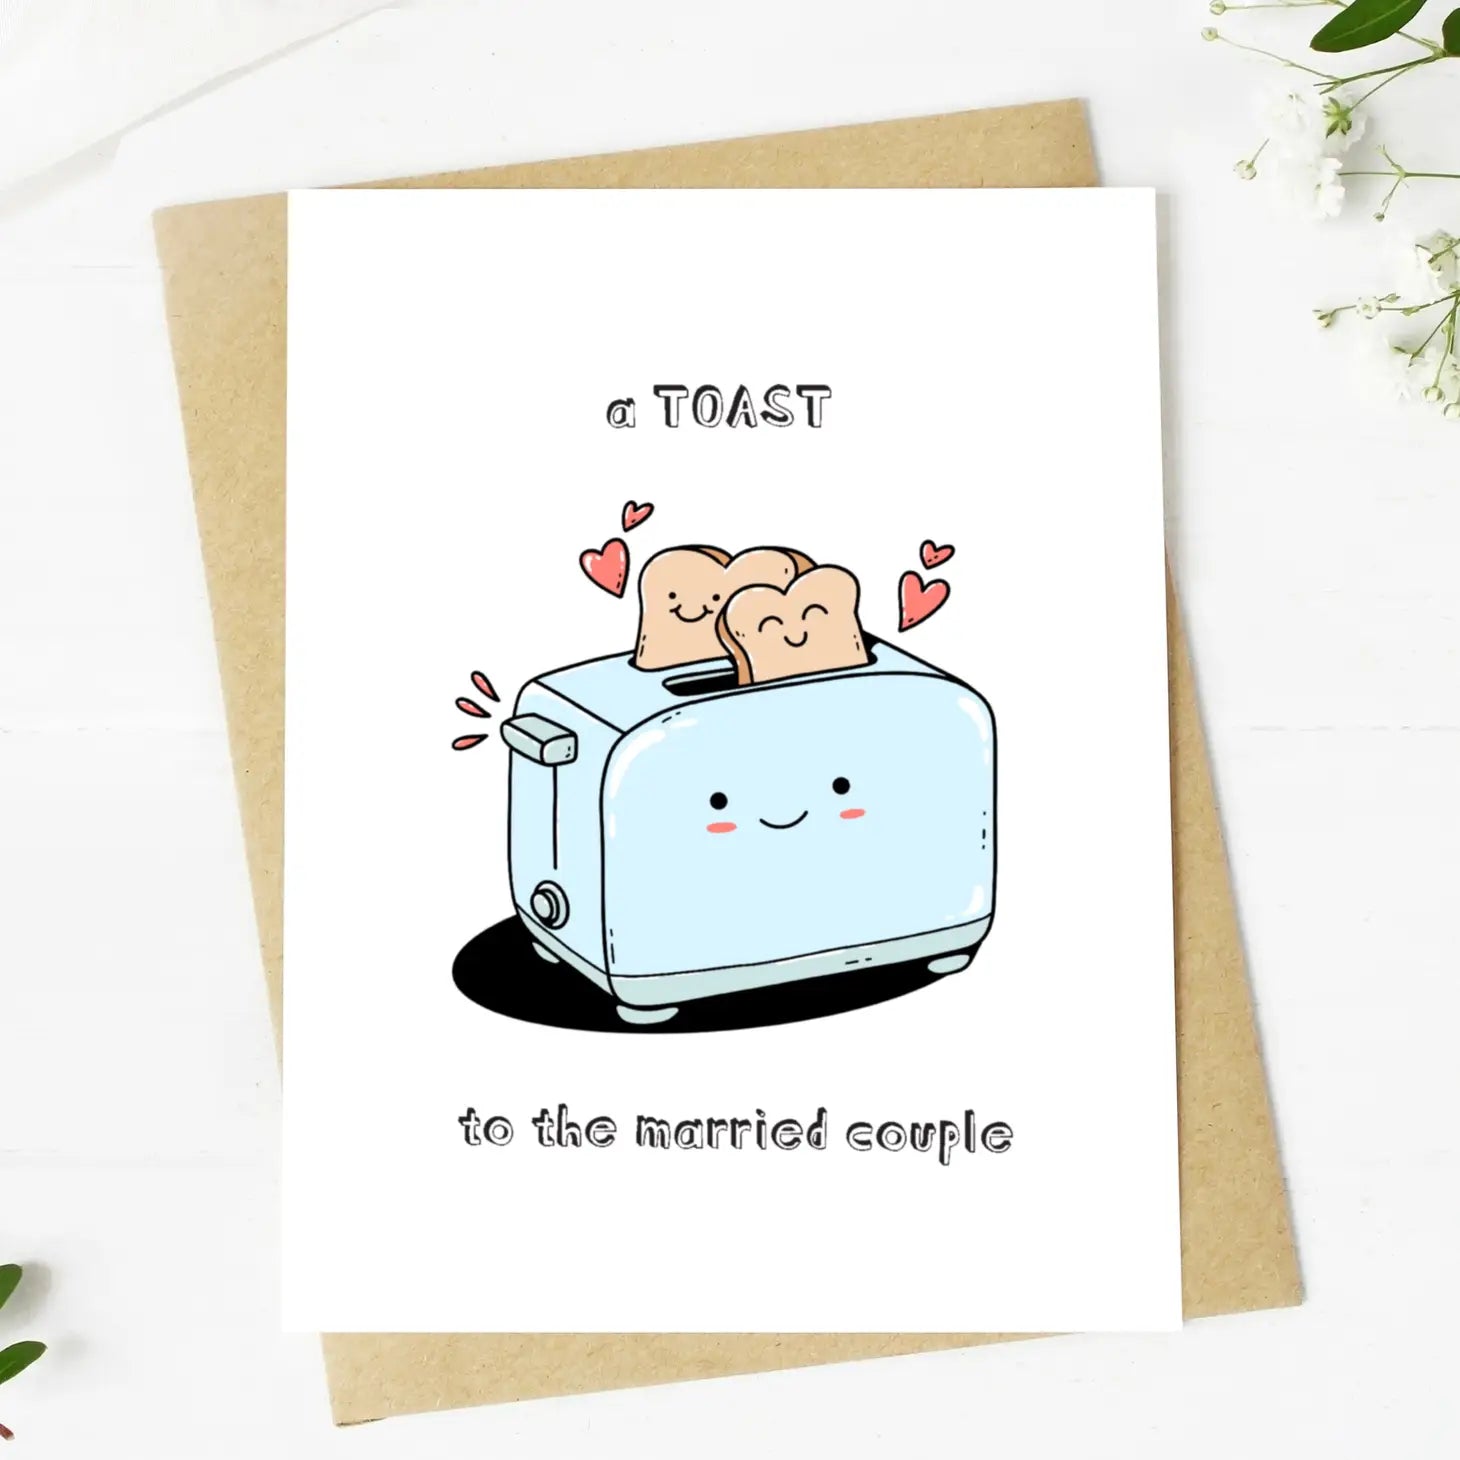 Toast To The Married Couple - Greeting Card